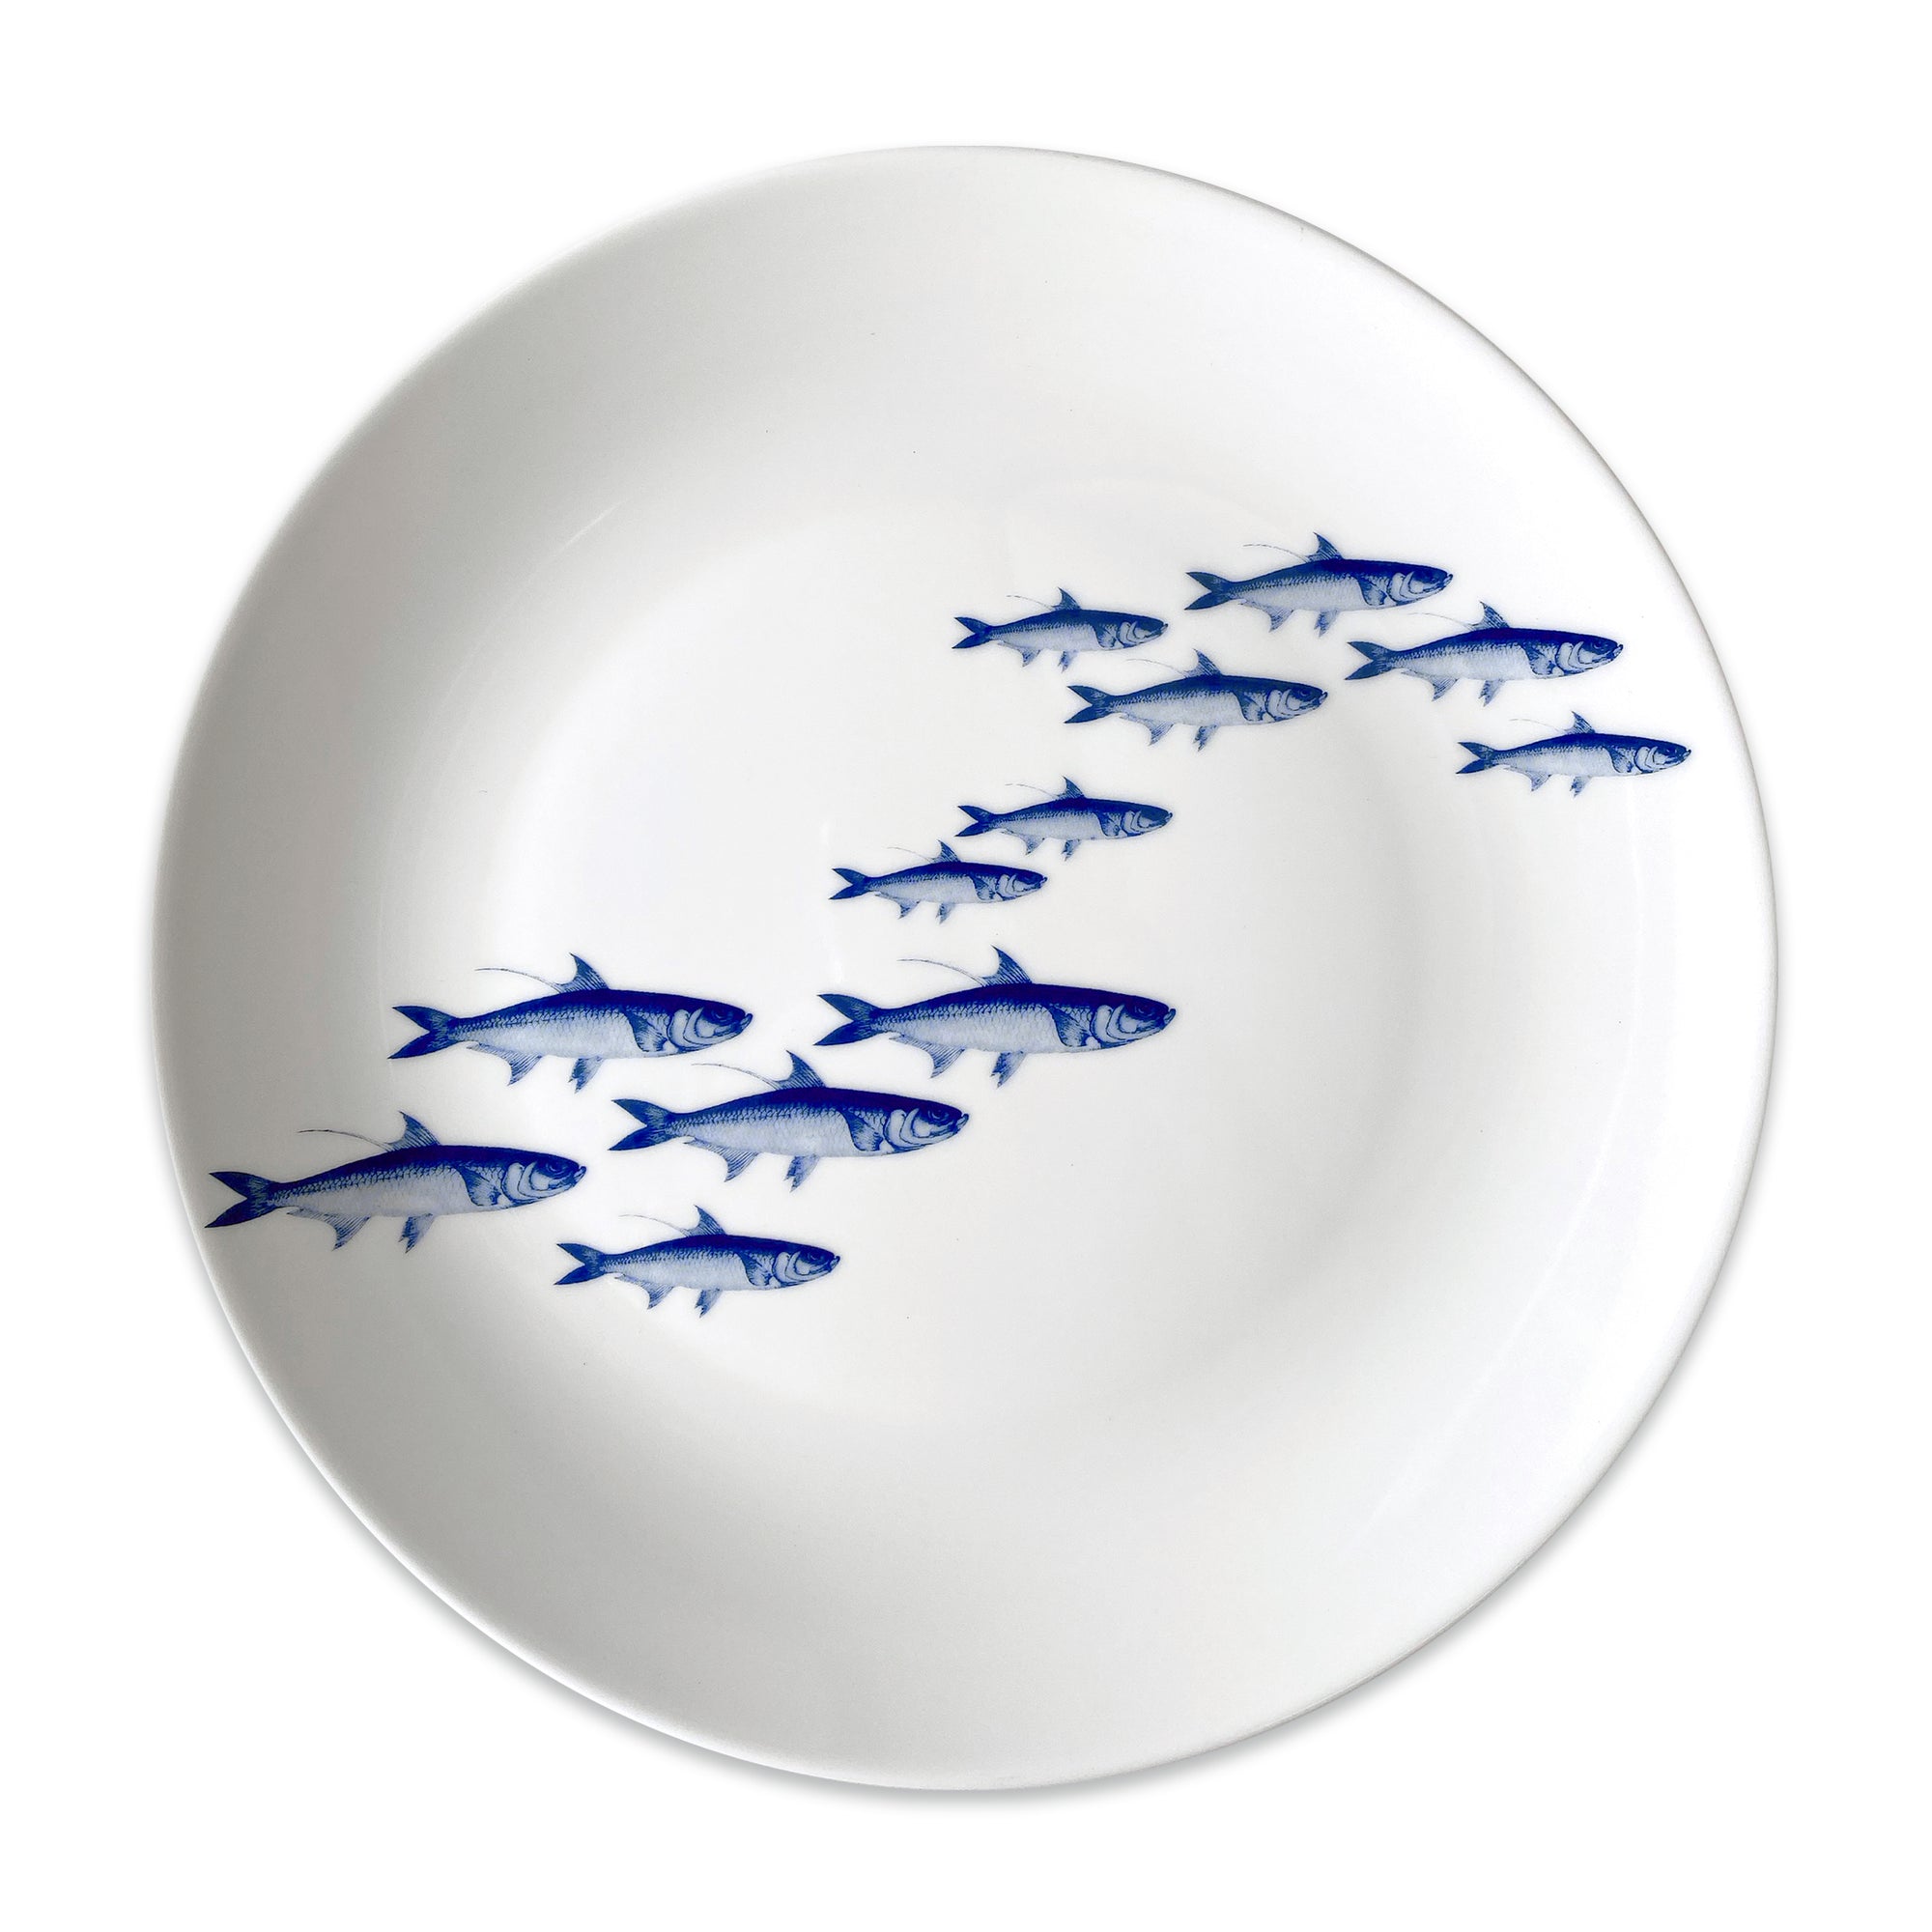 School of Fish Coupe Dinner Plate from Caskata Artisanal Home, a white ceramic plate with a pattern of blue fish swimming in a curved line, viewed from above; this premium porcelain dinnerware is dishwasher safe.